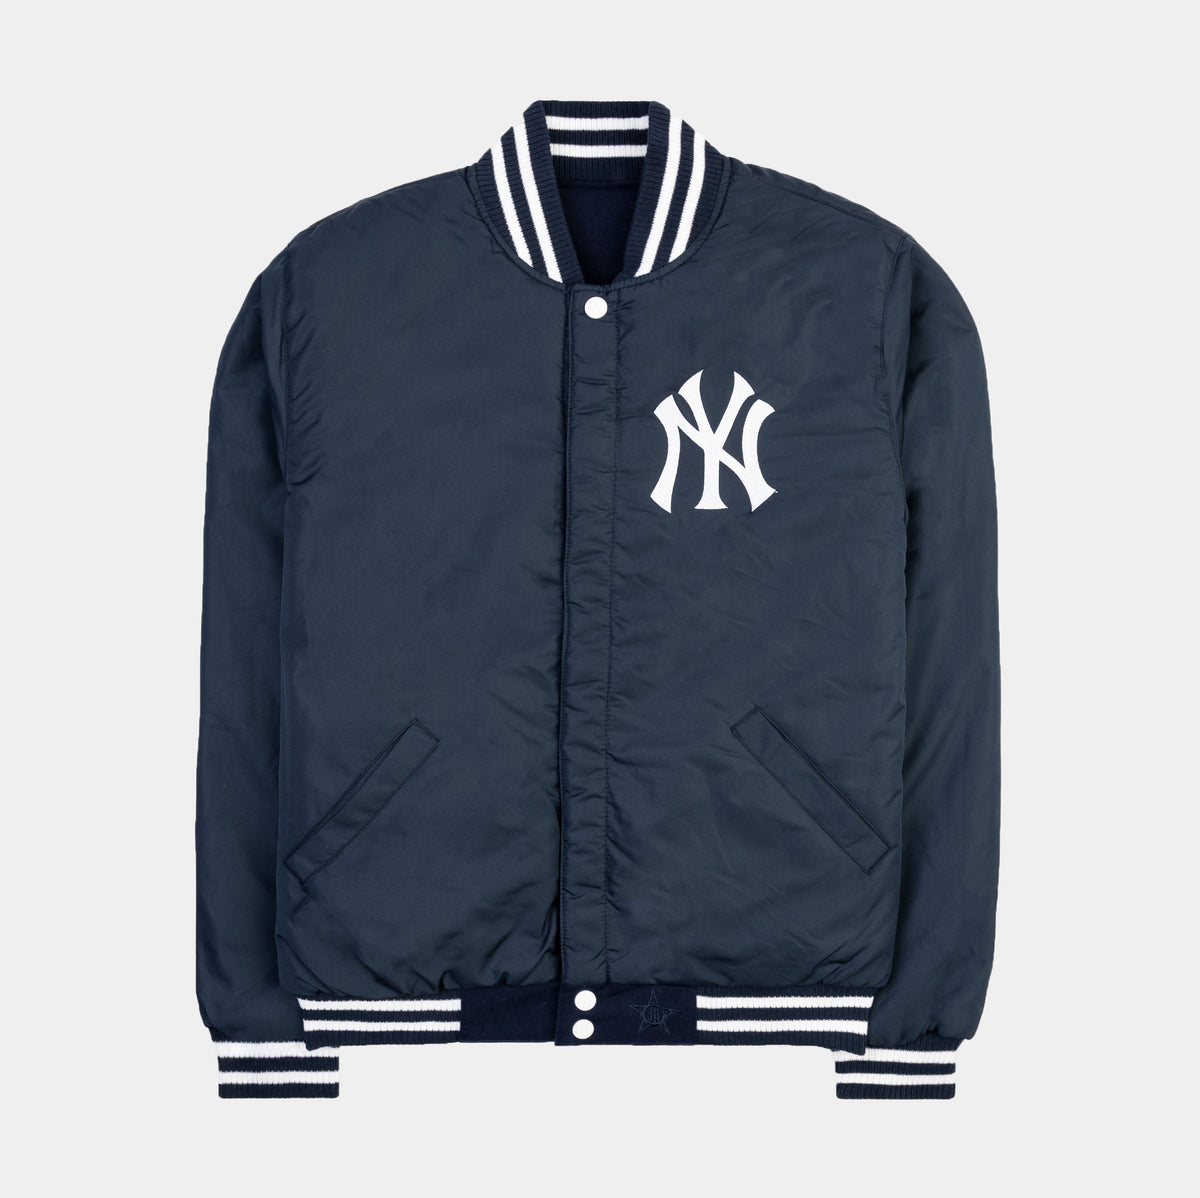 New York Yankees JH Design Reversible Fleece Jacket with Faux Leather Sleeves - Navy